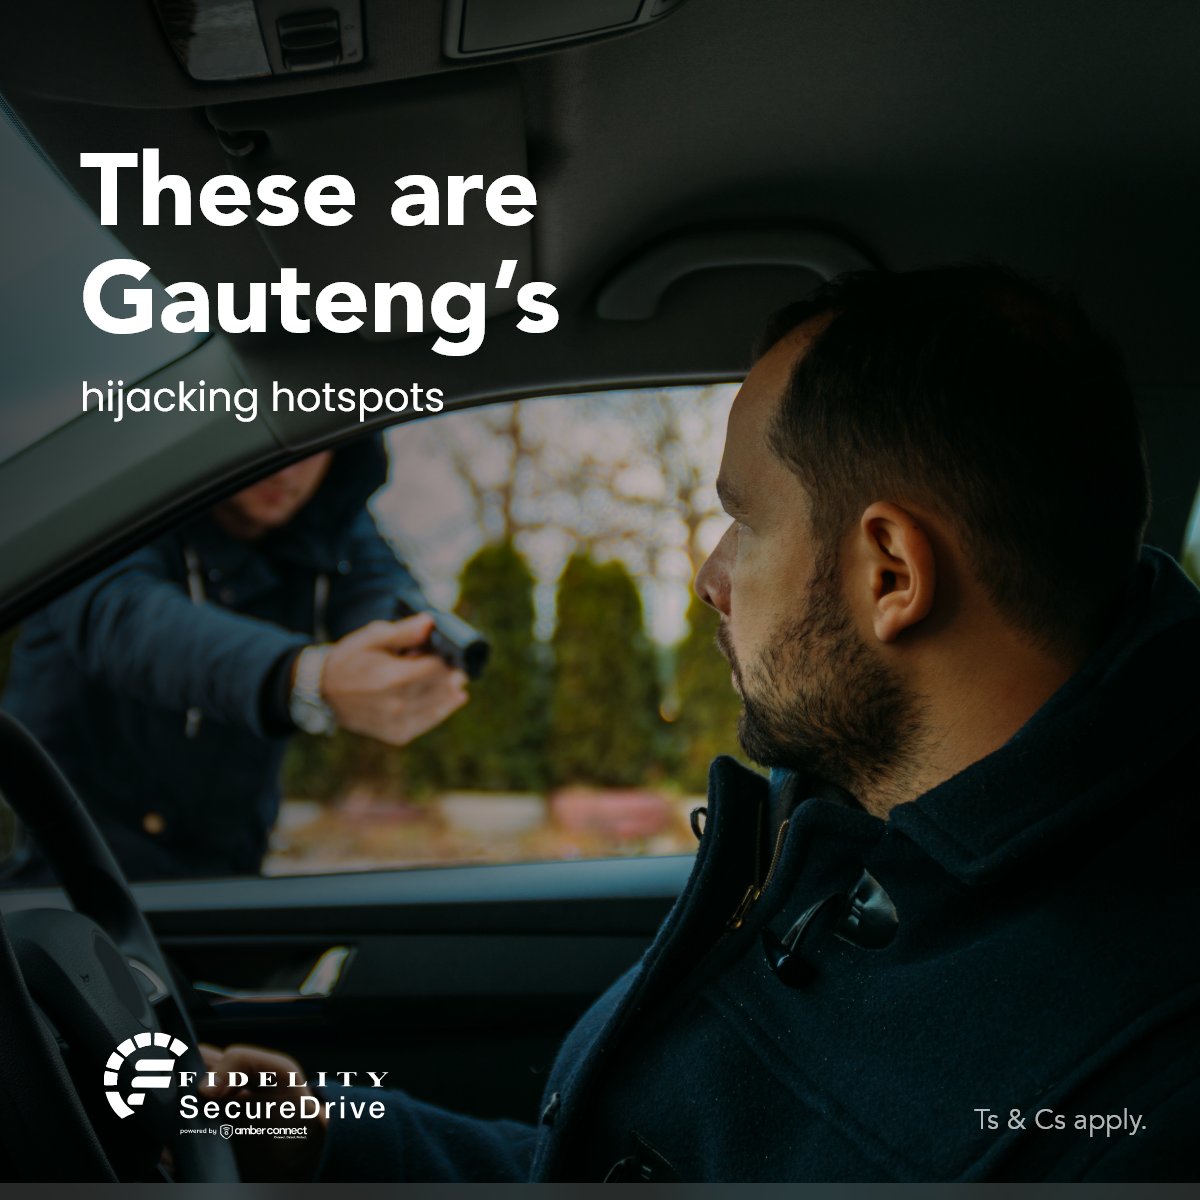 We’re here to help you stay safe, wherever the road takes you. Here are the top 10 hijacking hotspots in Gauteng: bit.ly/4c7CDOp

#FidelitySecureDrive #VehicleTracking #YourDrivingCompanion